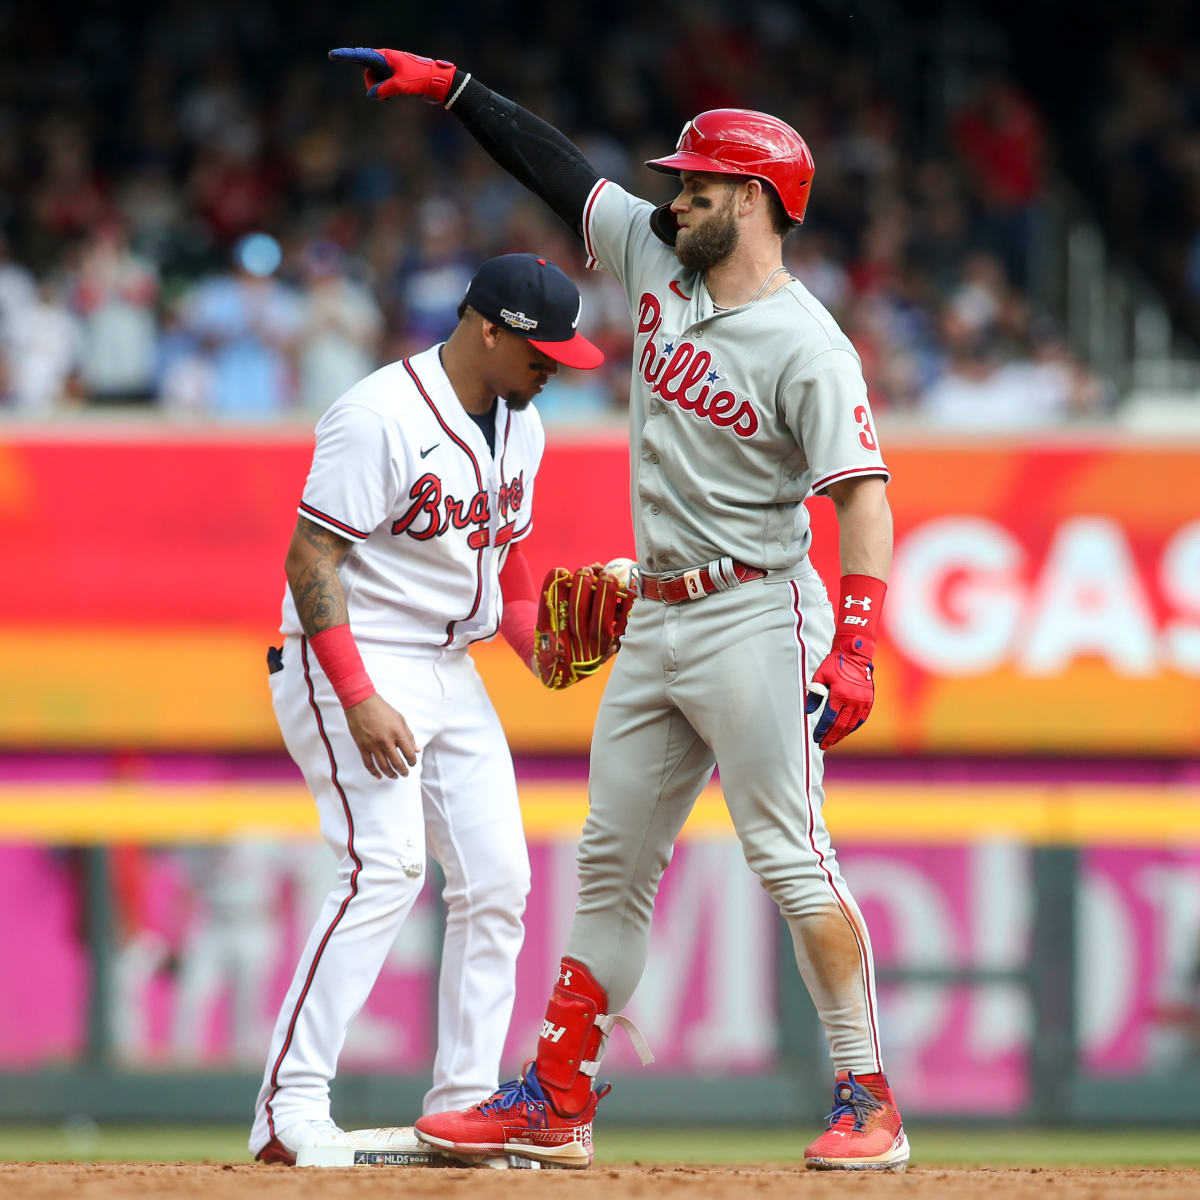 Phillies over Braves in Game 2